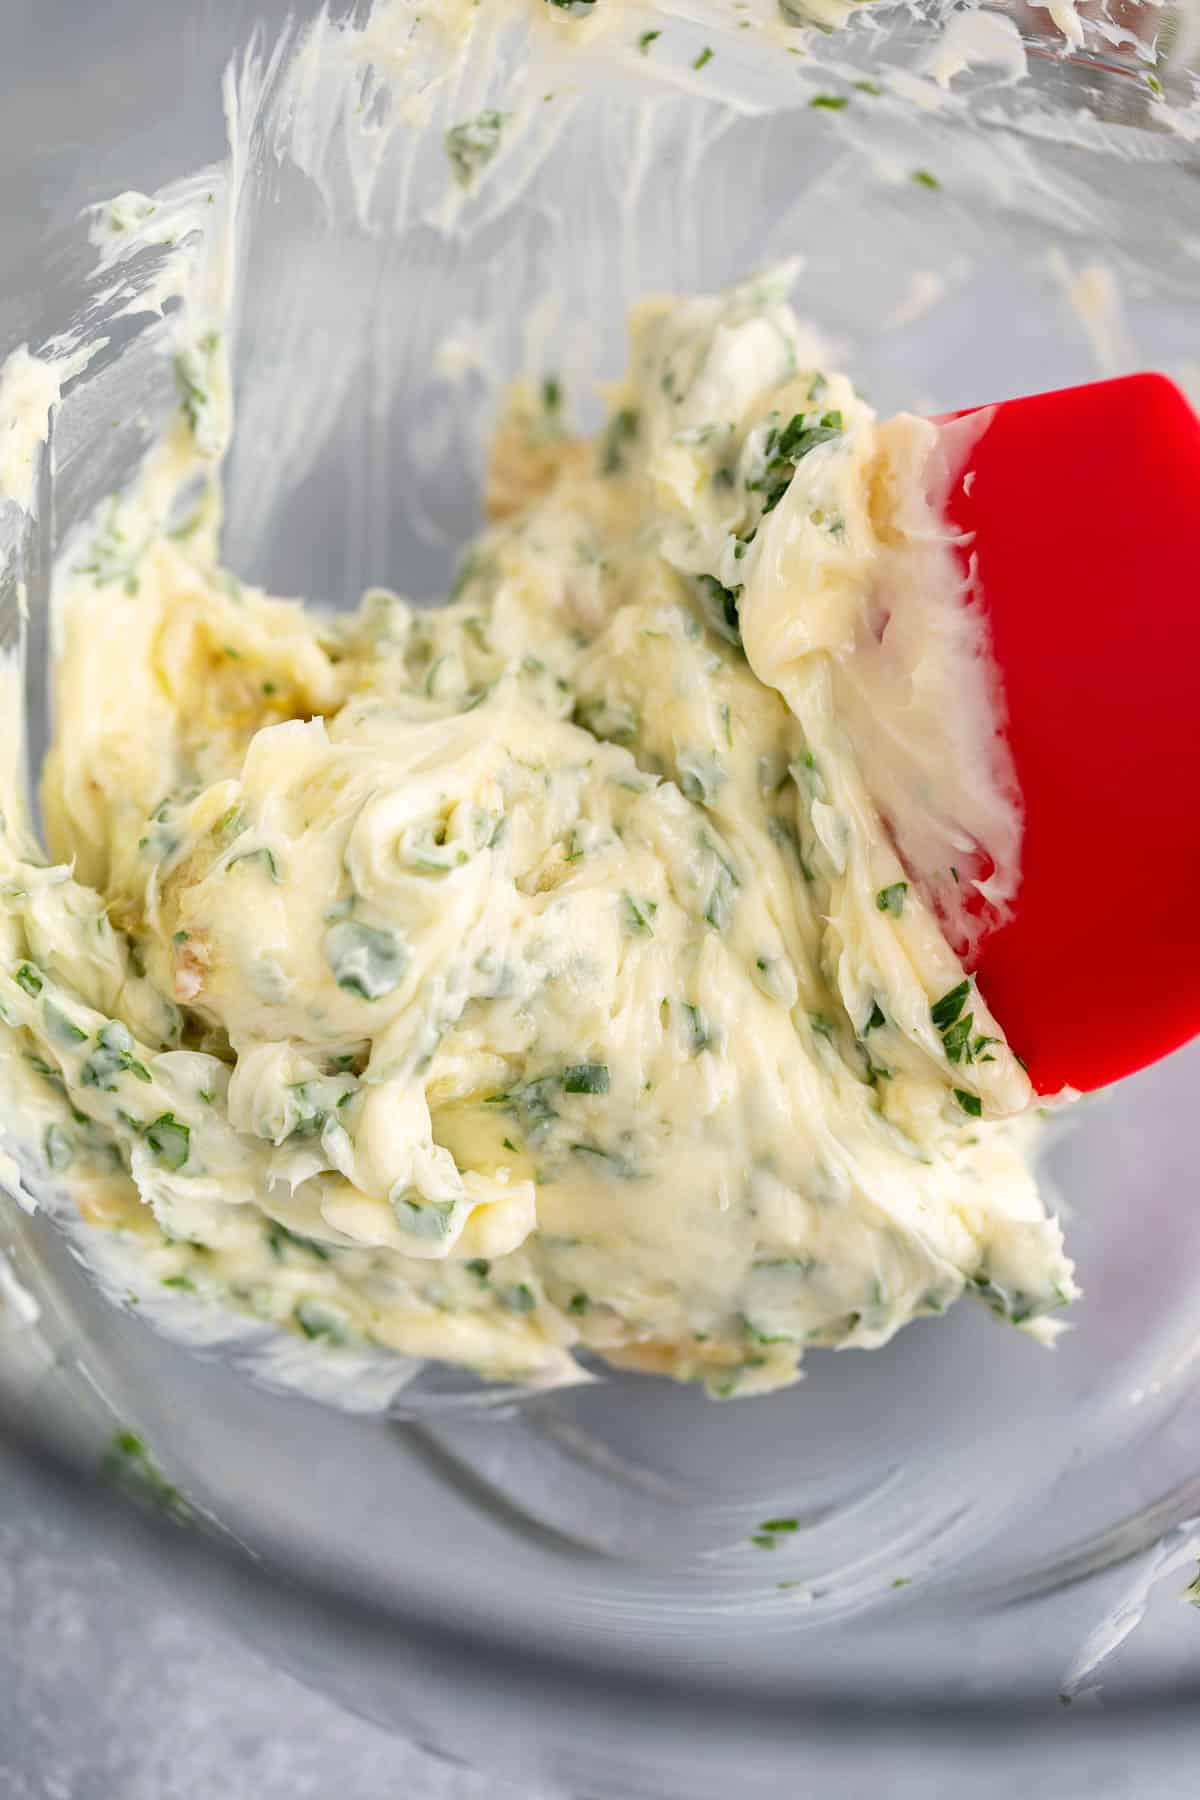 Whipped butter with herbs in a glass bowl.